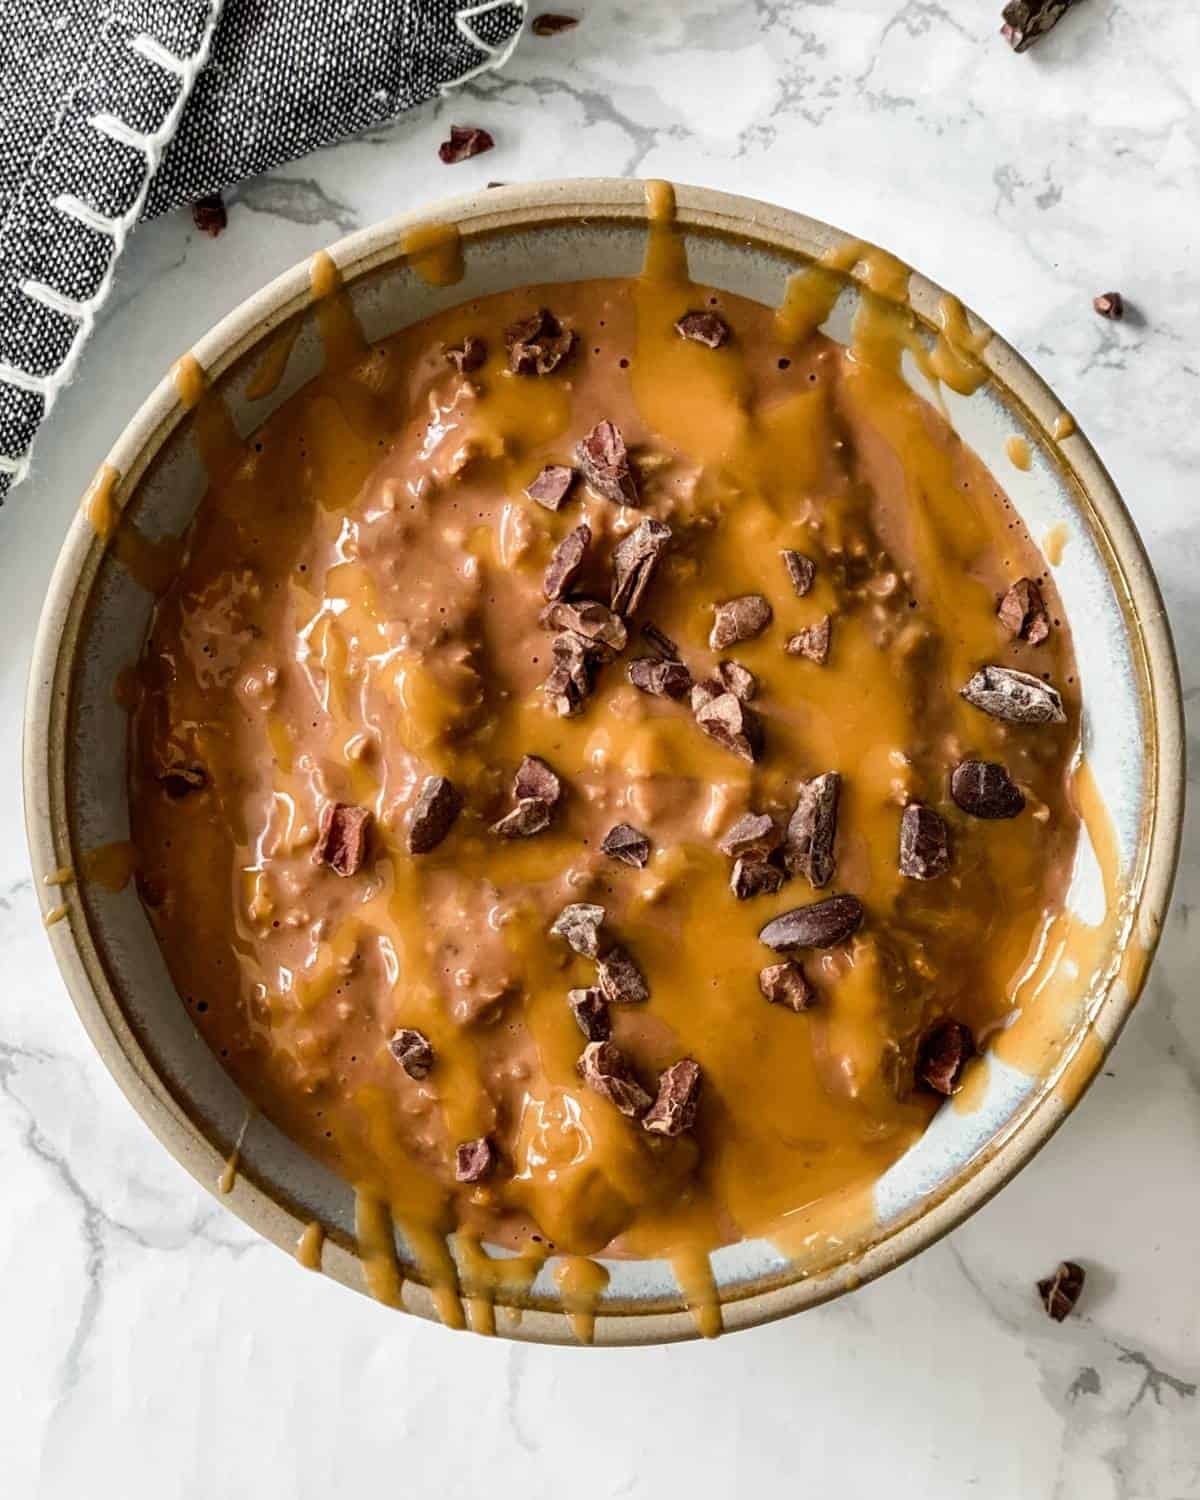 creamy pudding-like overnight oats with chocolate and peanut butter. 